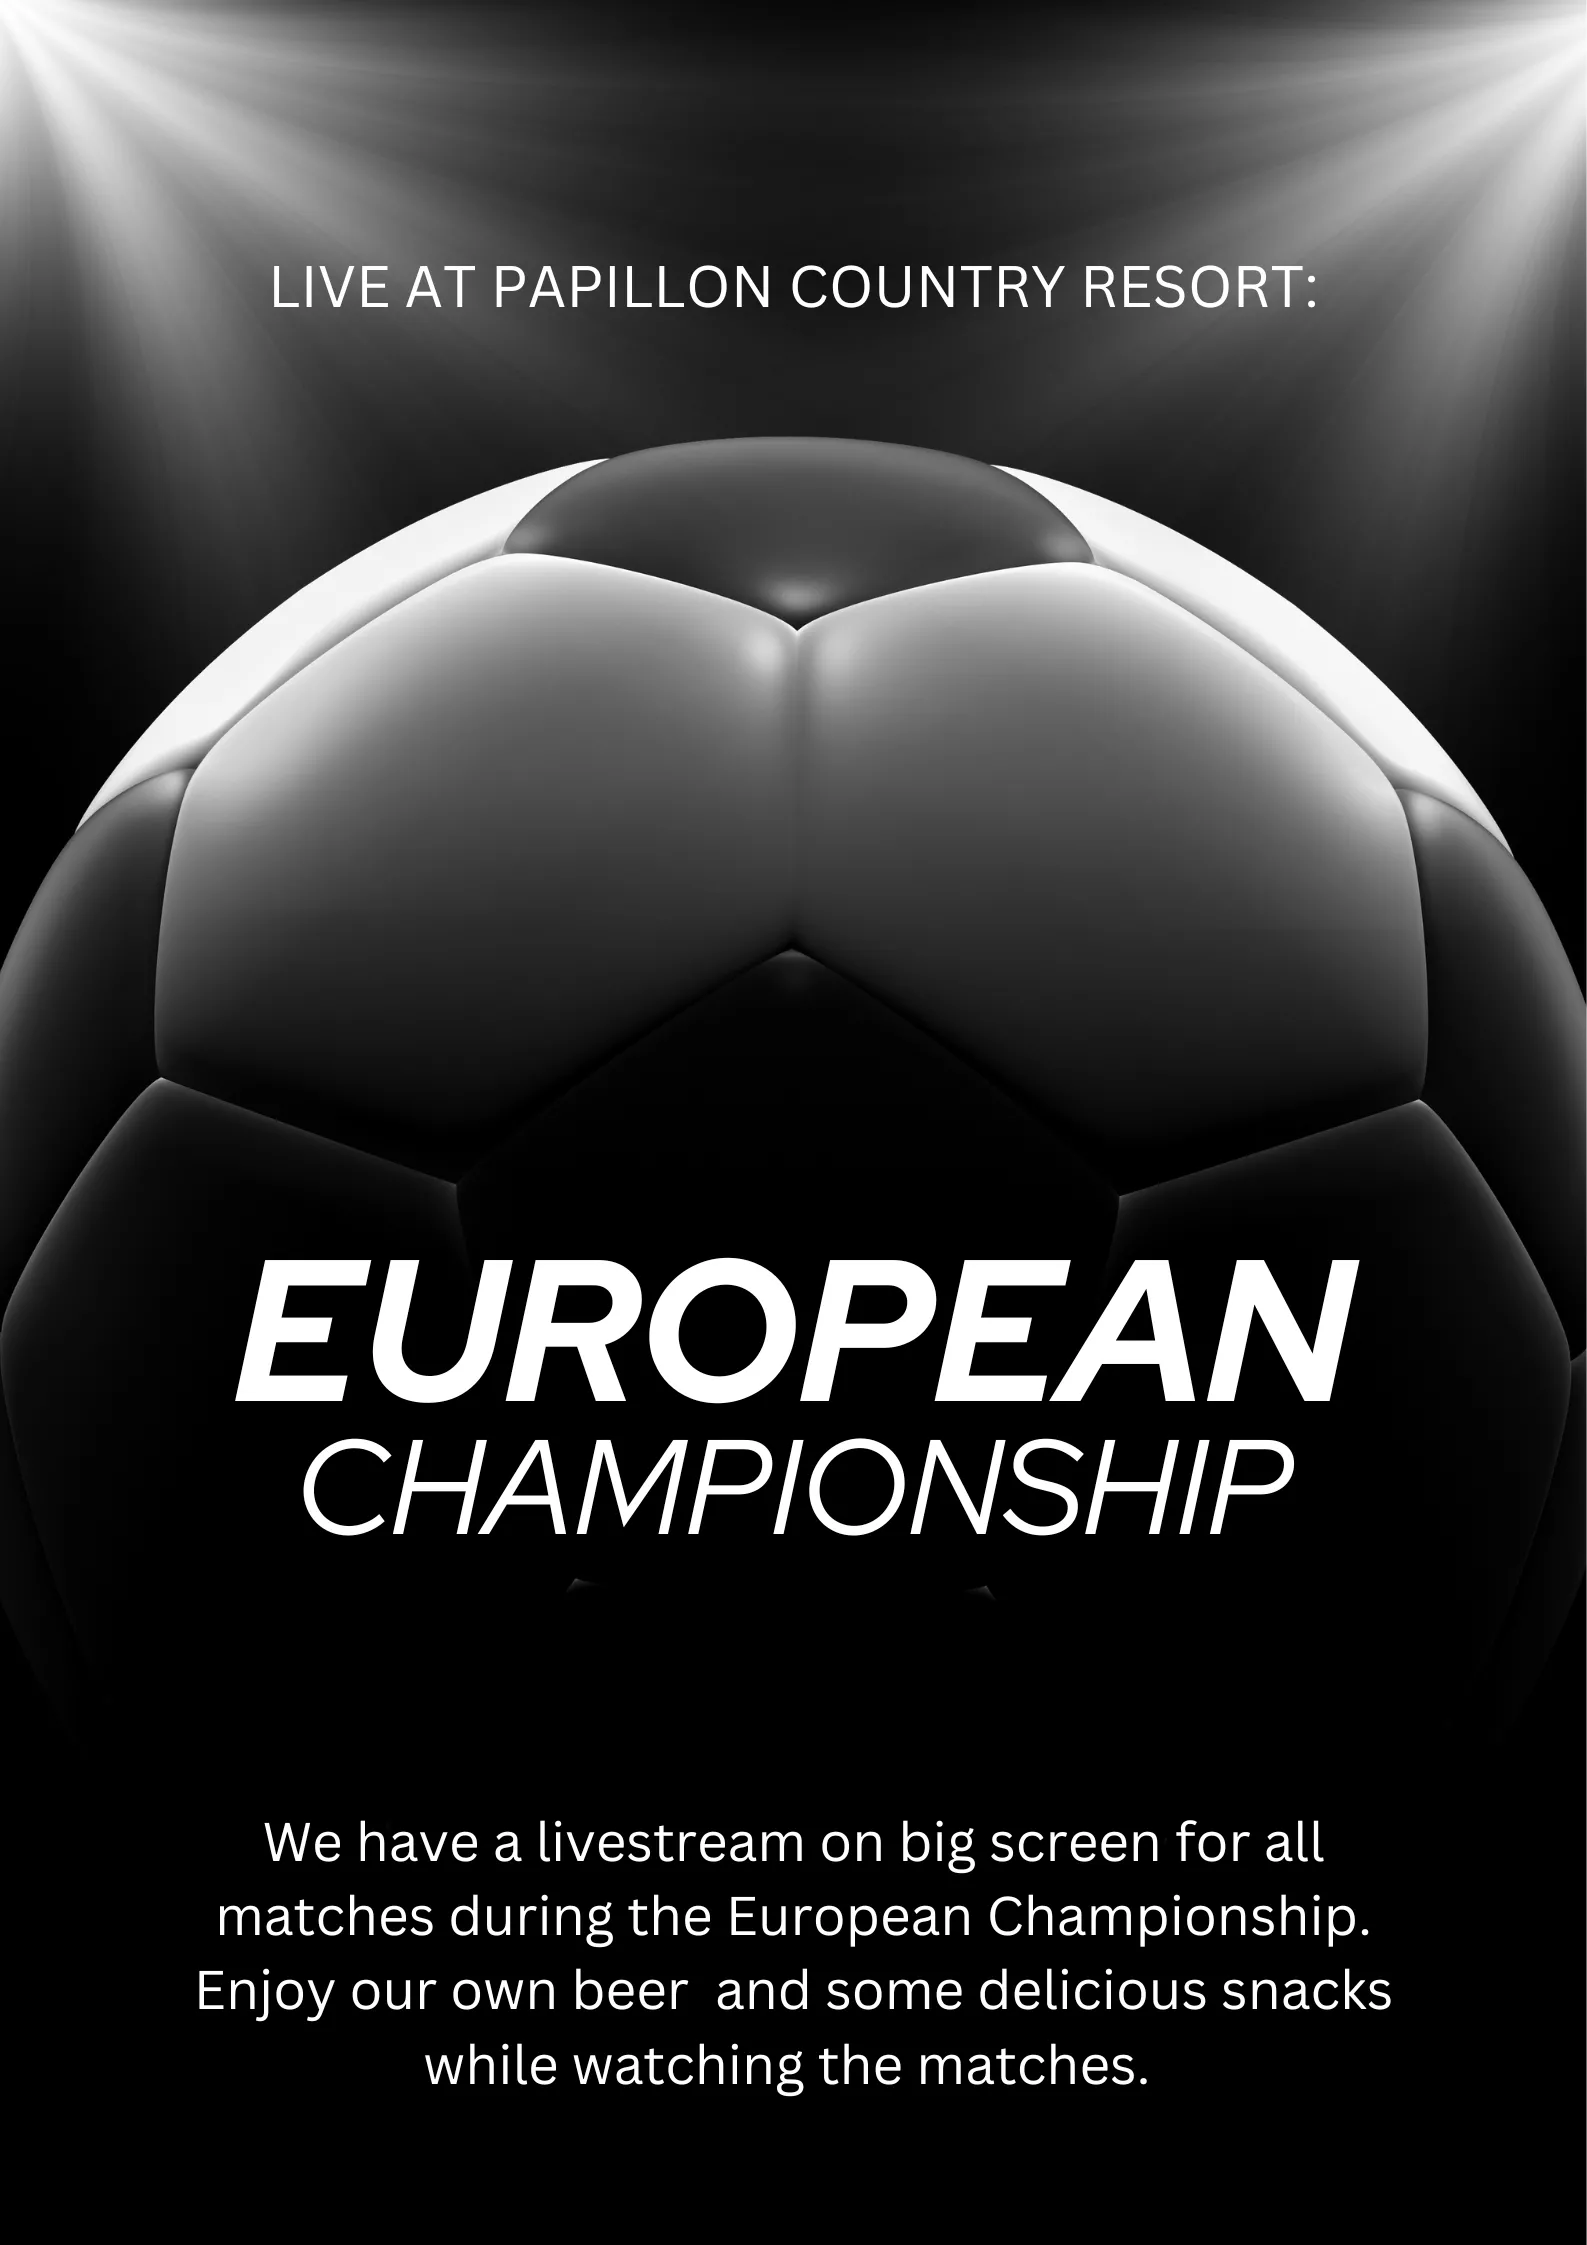 Come and watch the European Championships at Papillon Country Resort!